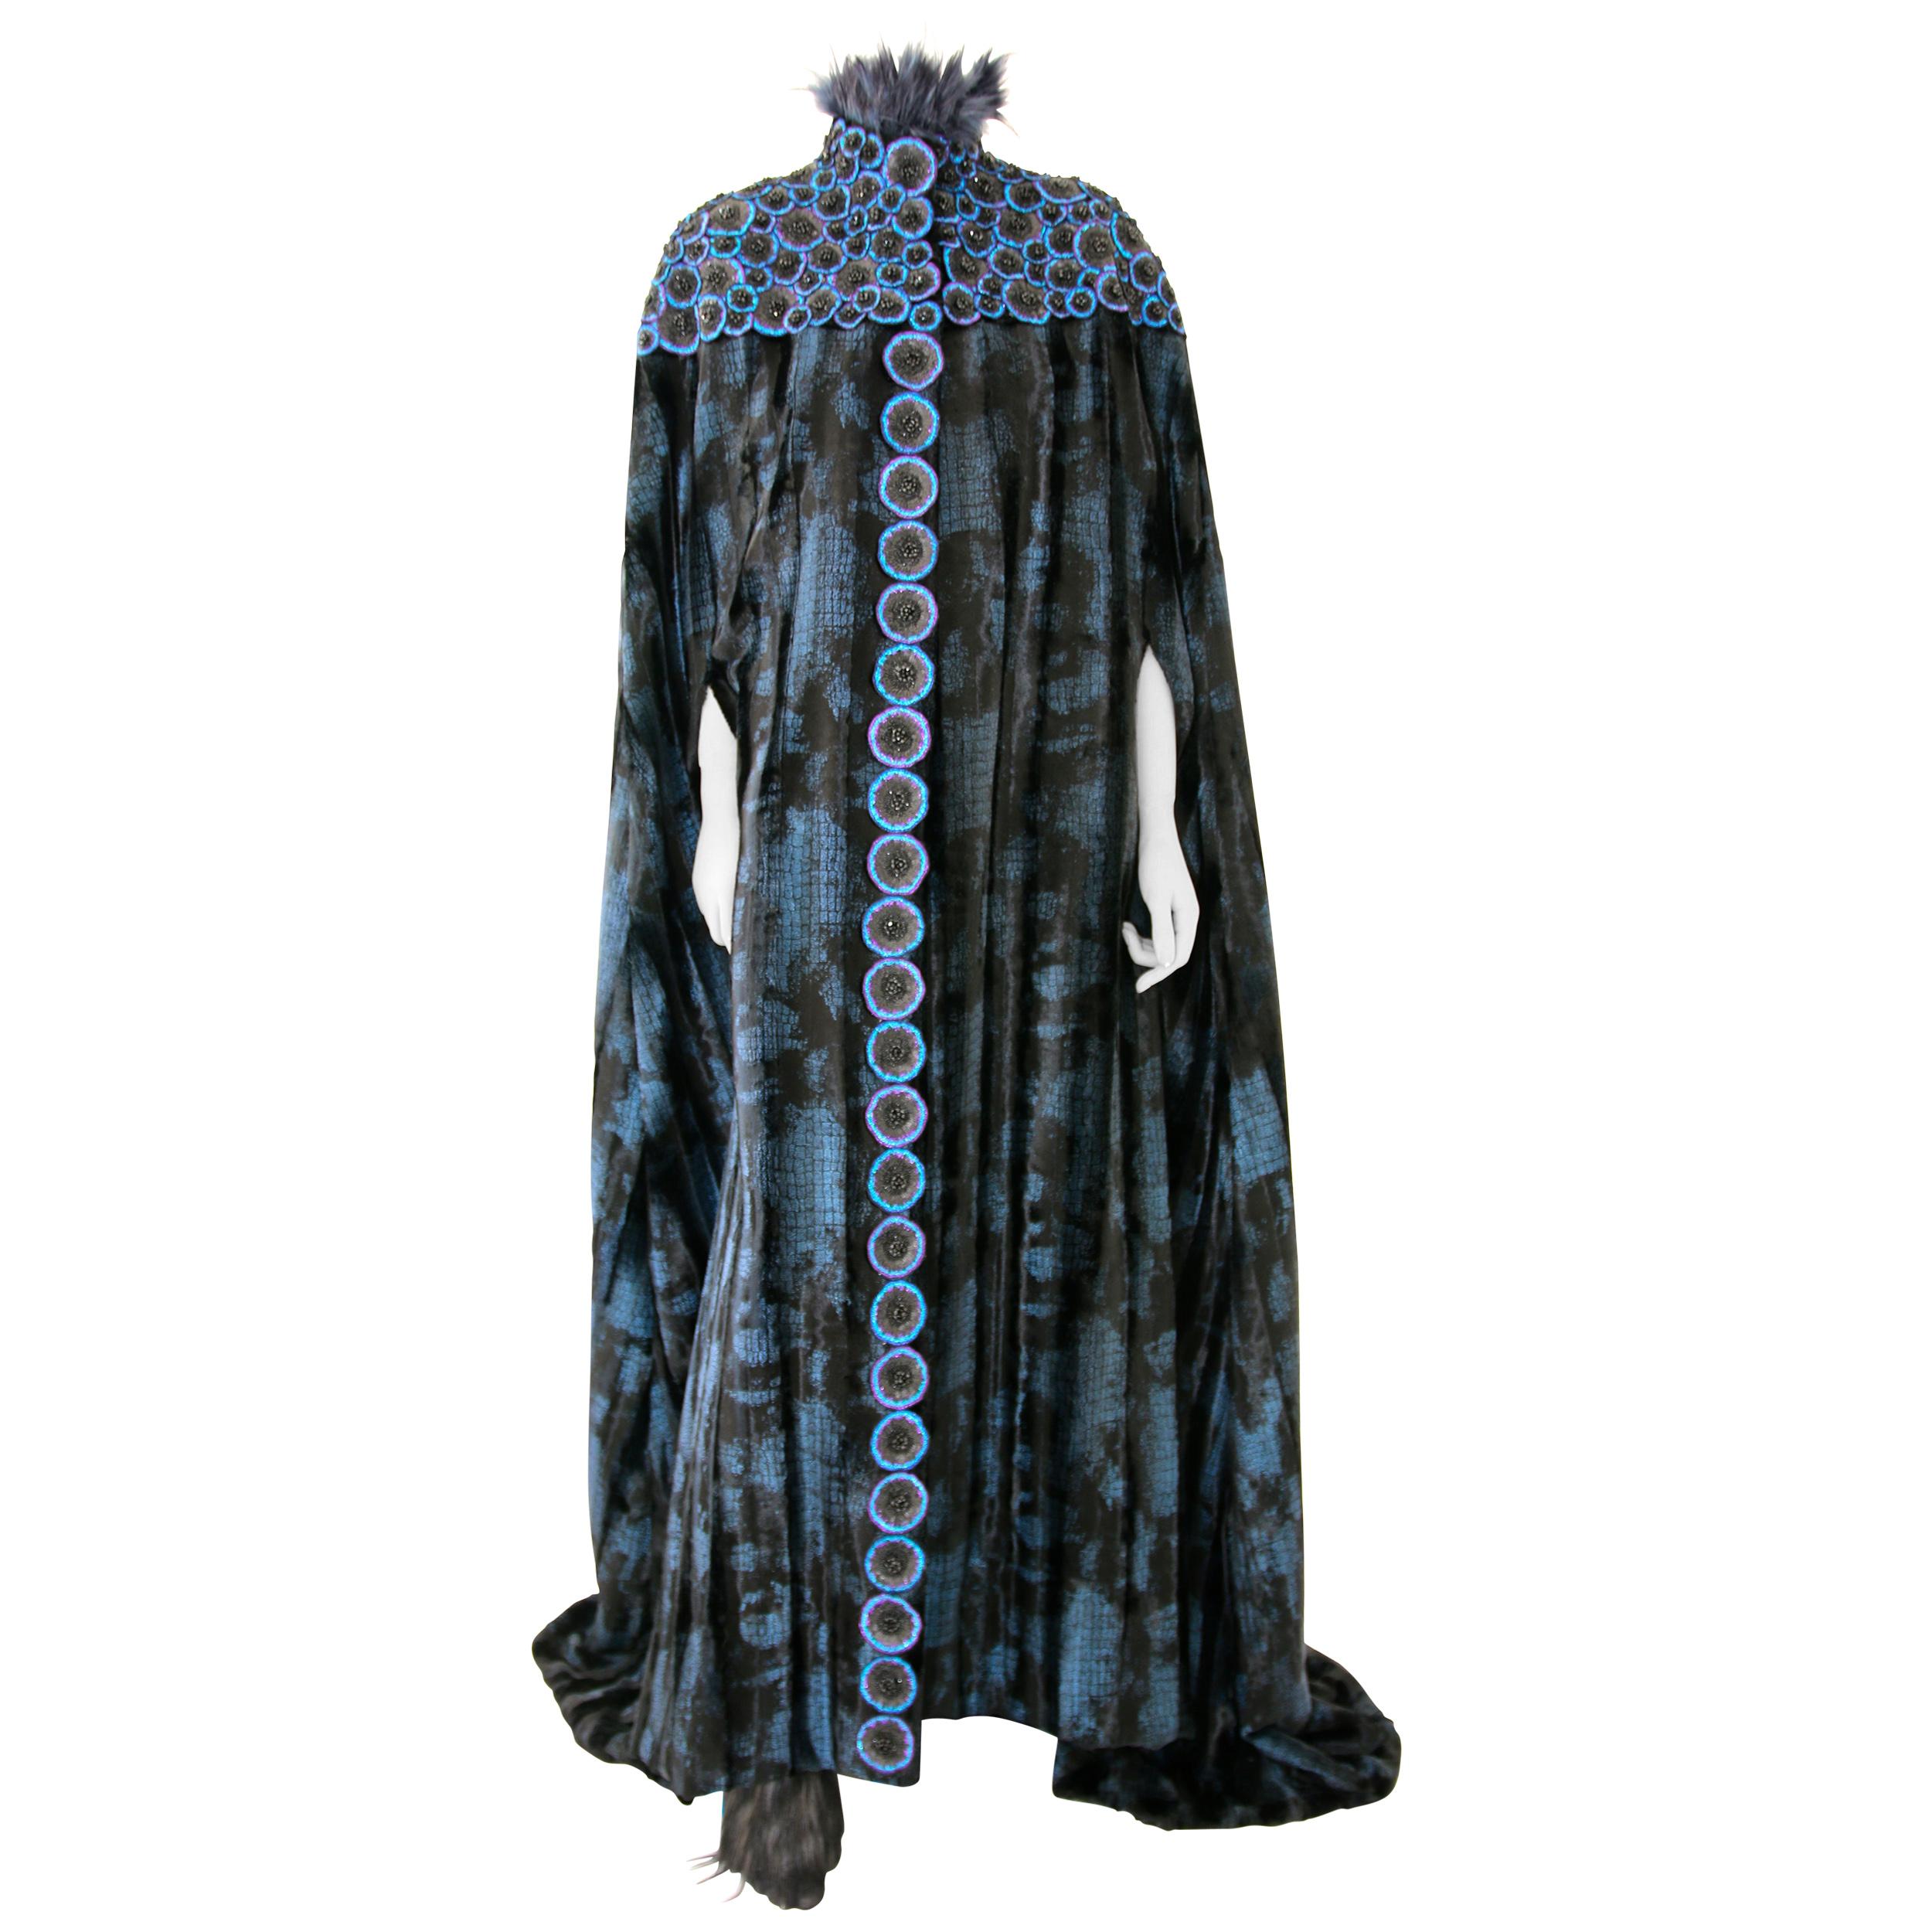 Pelush Black and Blue Faux Fur Couture Opera Coat Cape with Embroidery - Small For Sale